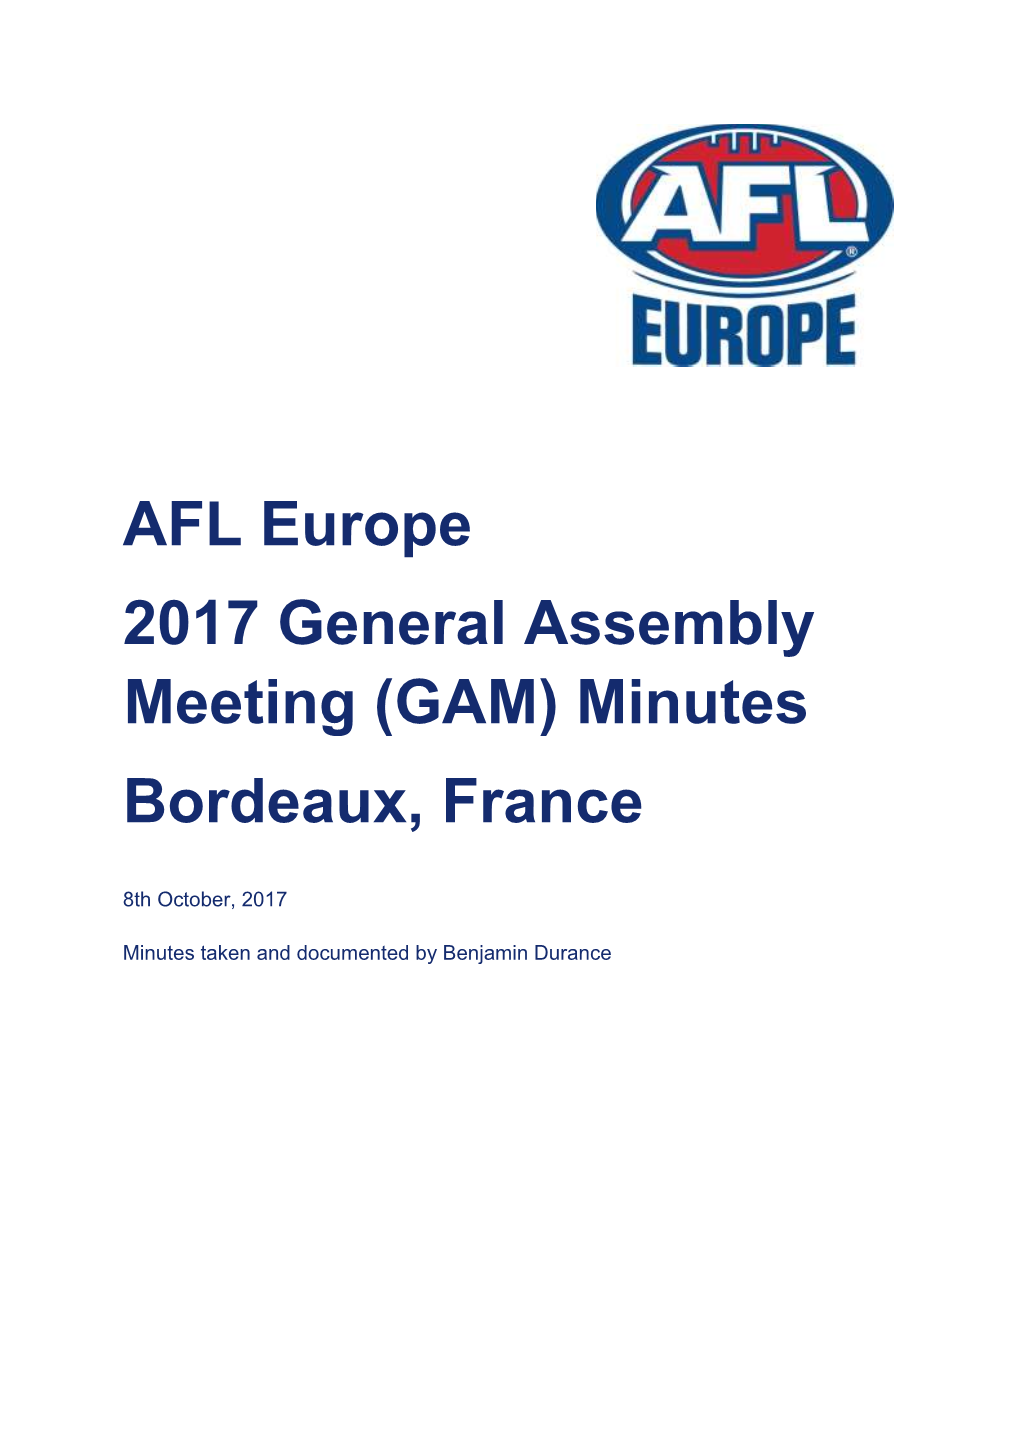 AFL Europe 2017 General Assembly Meeting (GAM) Minutes Bordeaux